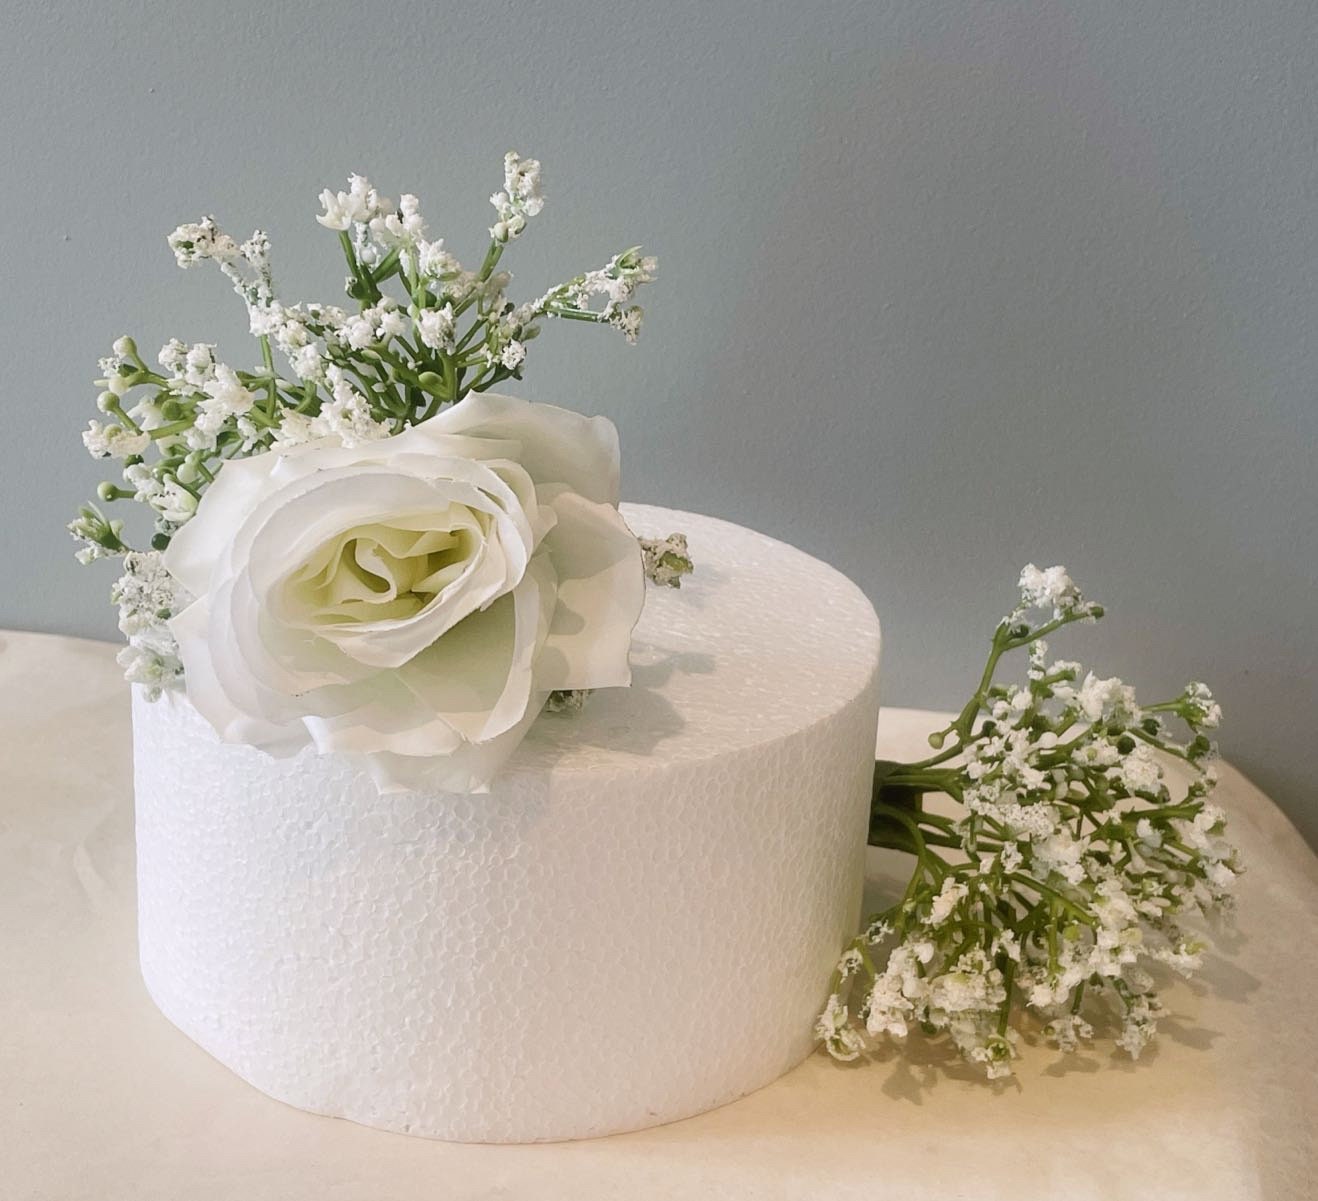 Artificial Flowers Cake Decorations